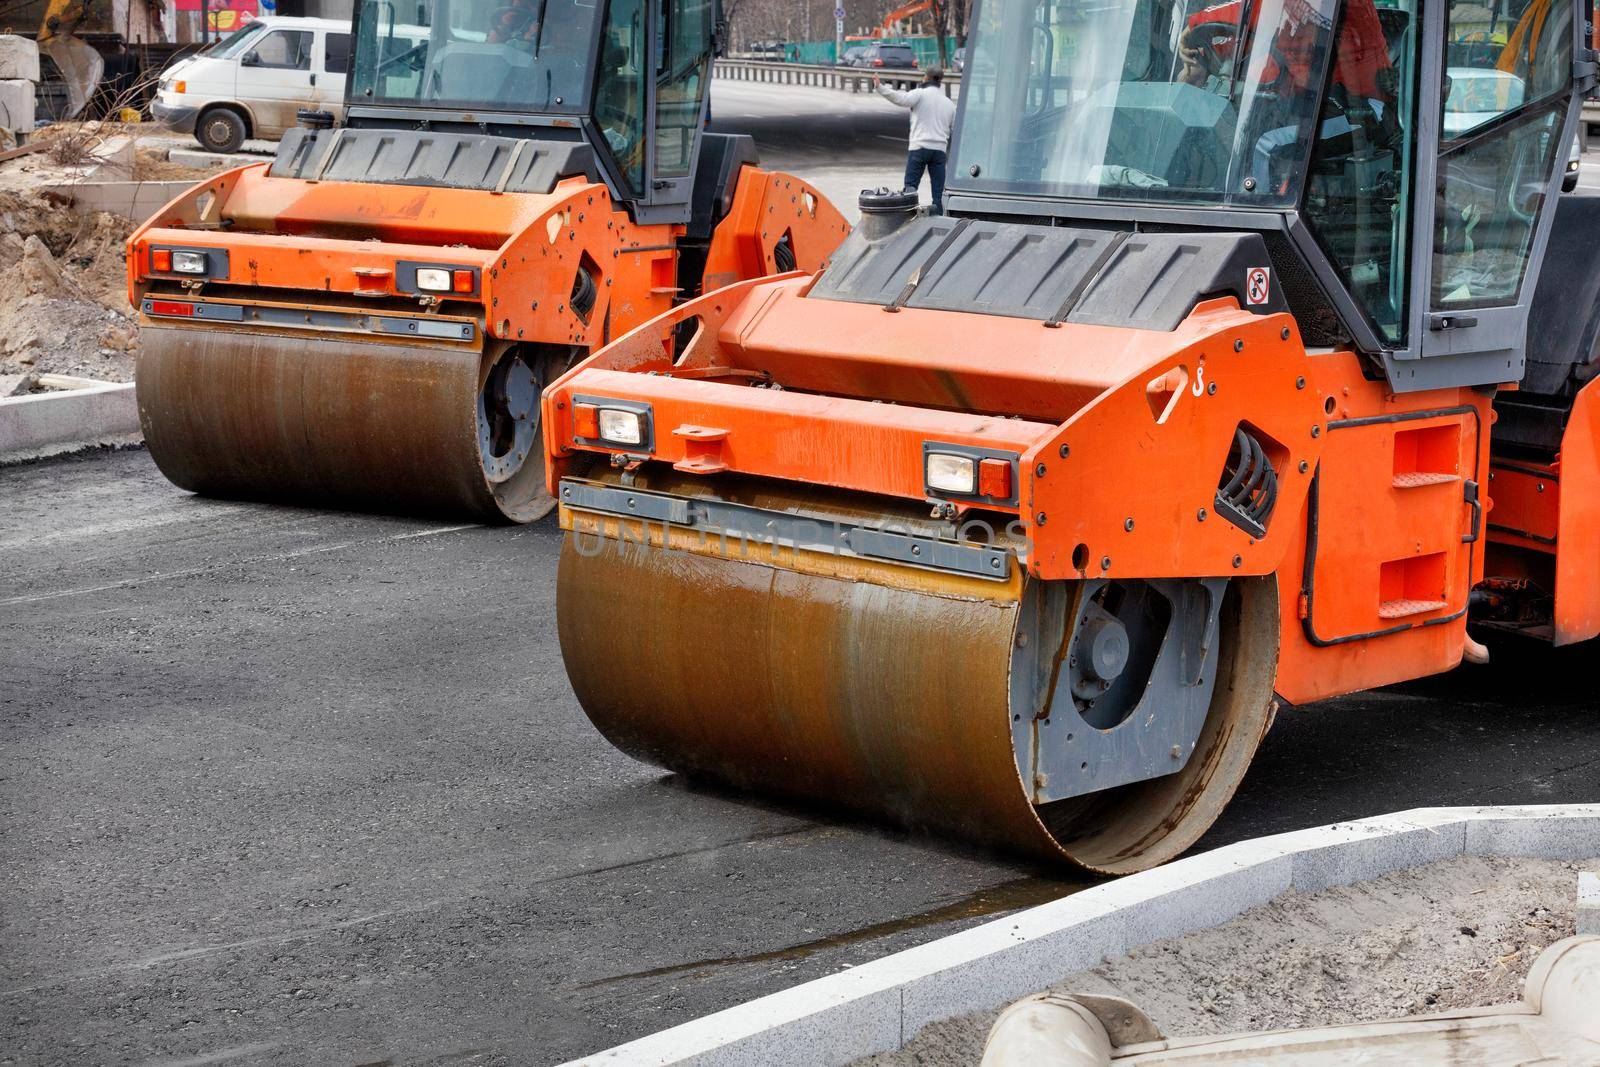 Two large vibratory road rollers compact the fresh asphalt on a new stretch of road. by Sergii